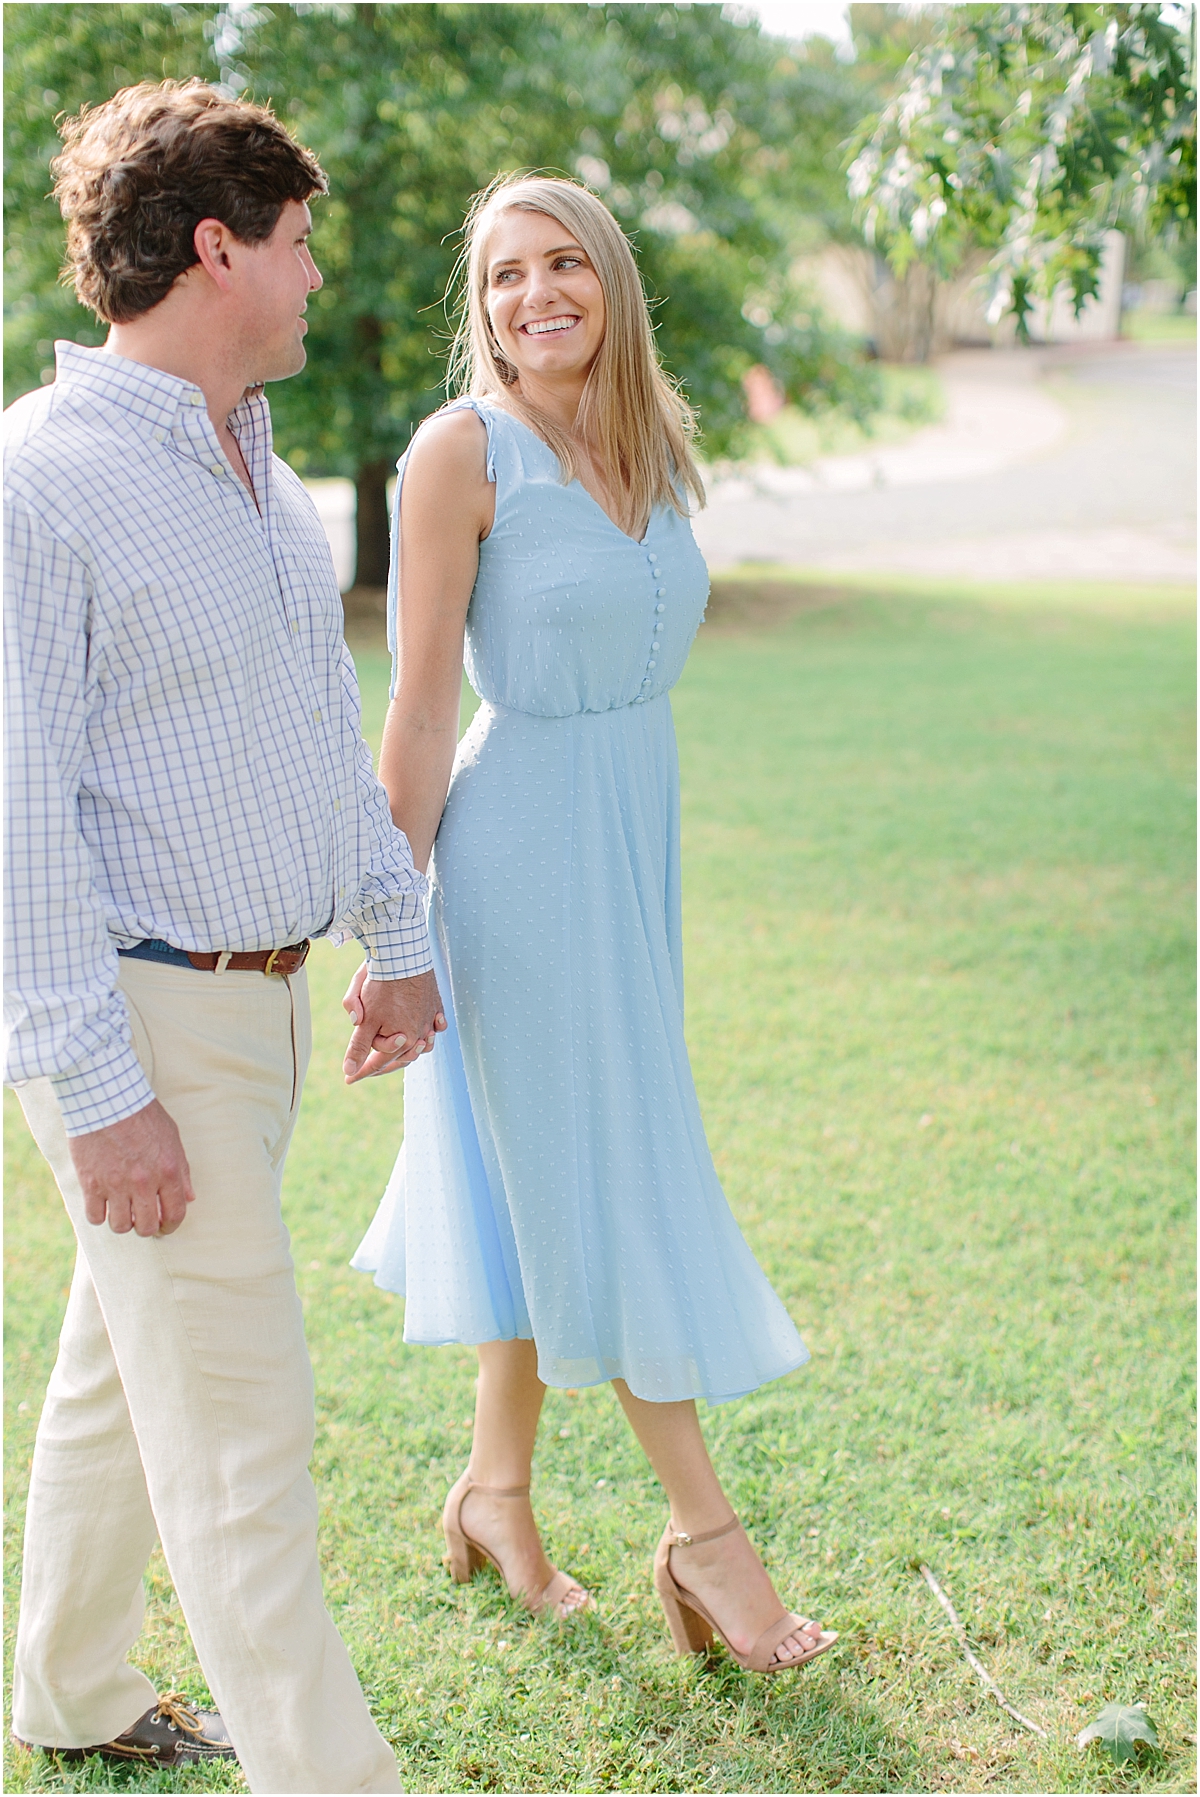  Libby Hill Engagement Session, Nicki Metcalf Photography